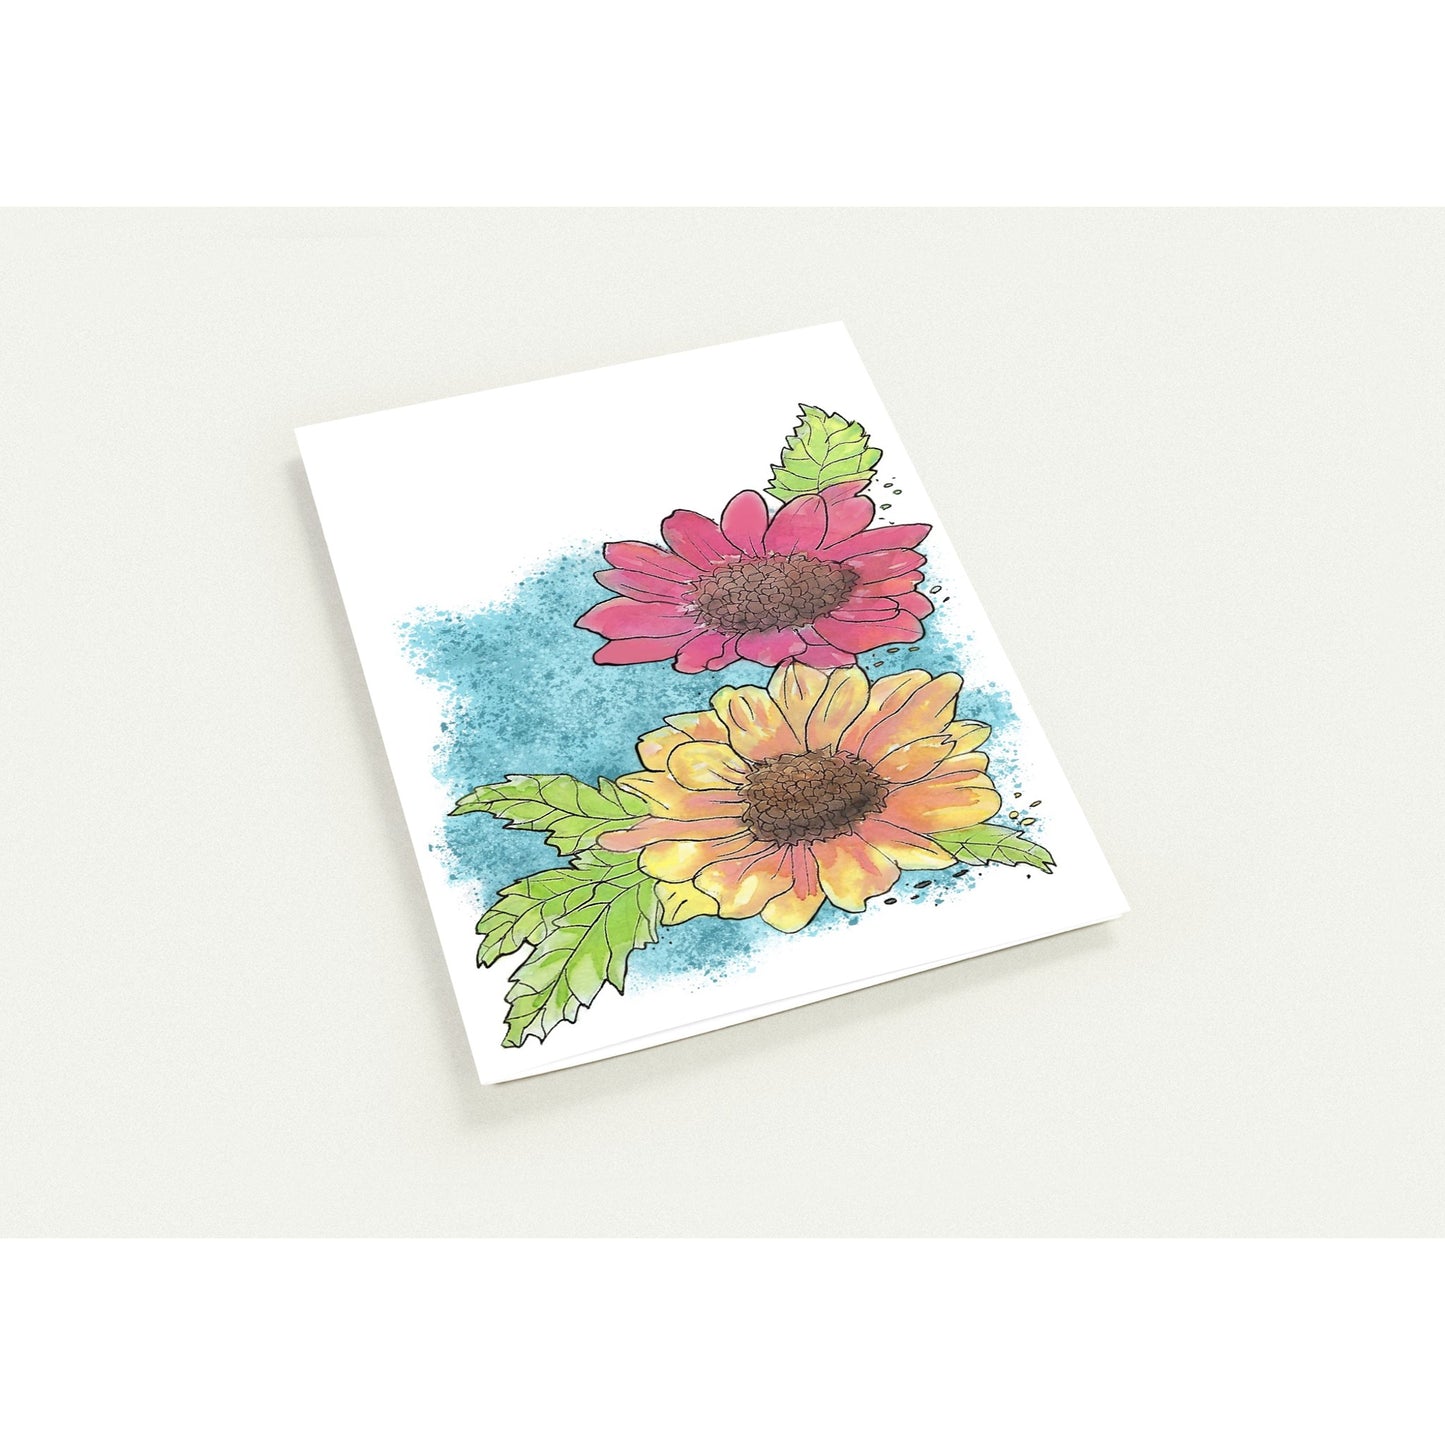 5 by 7 inch Gerber daisies set of 10 greeting cards and 10 envelopes. Printed on glossy paperboard. Front has a print of watercolor Gerber daisies on a blue accent. Inside has a blue watercolor border with daisy accents.